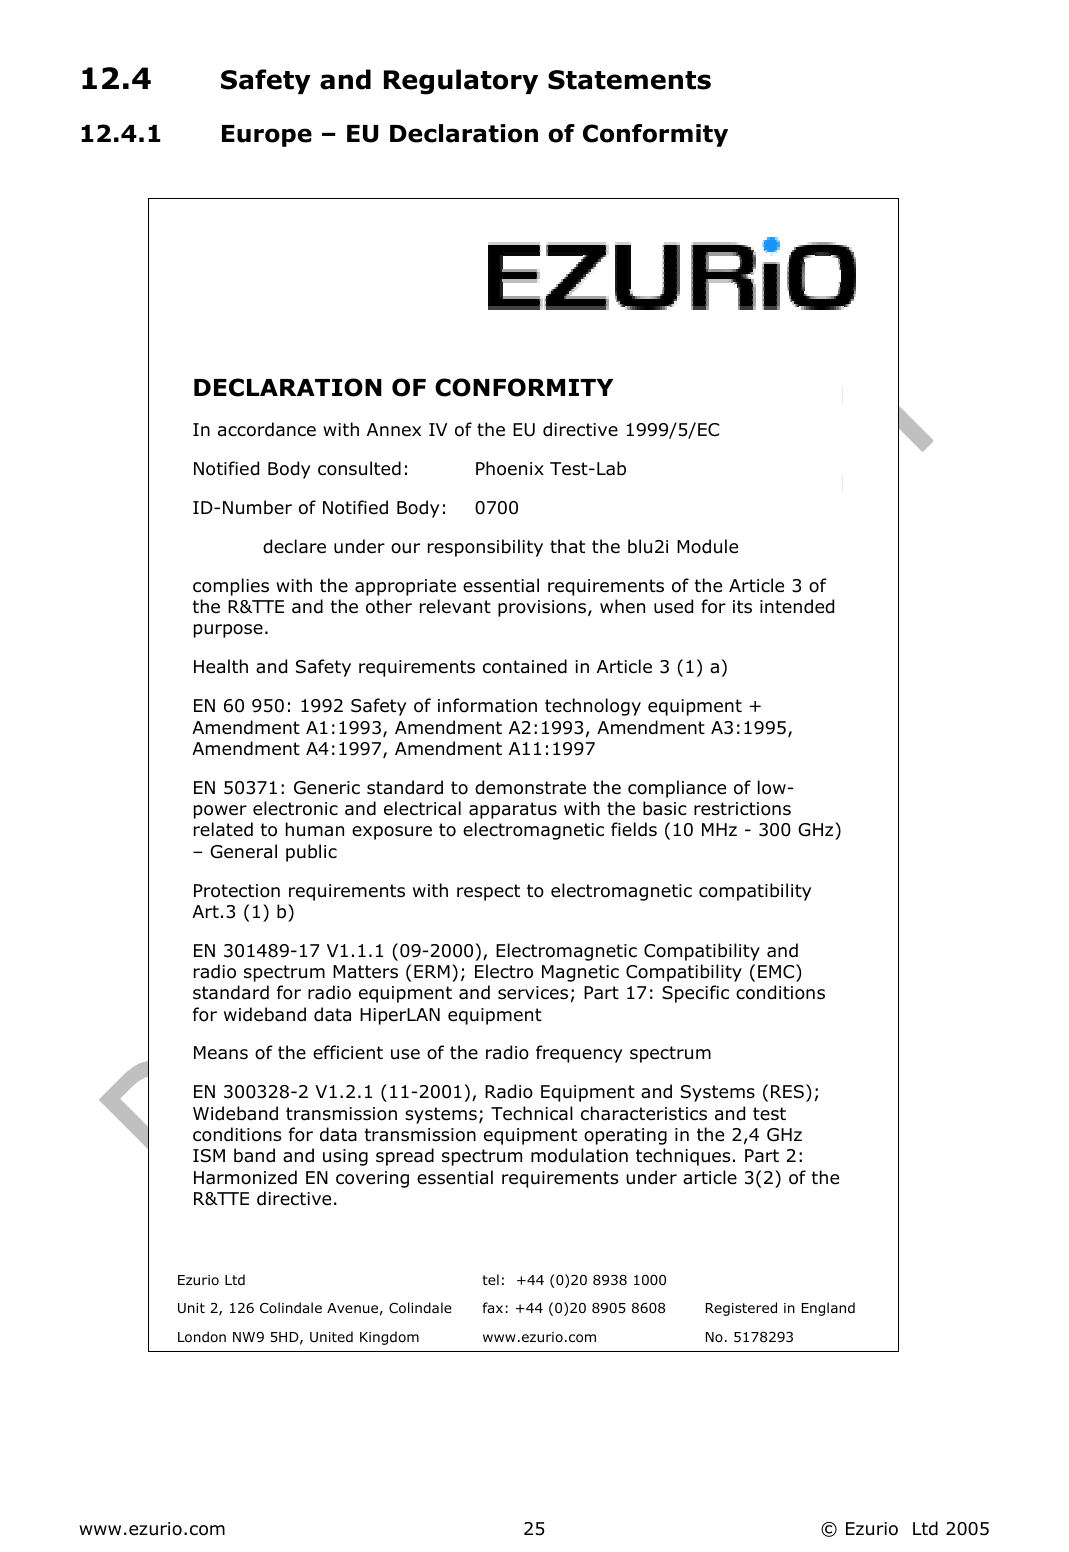  www.ezurio.com  © Ezurio  Ltd 2005 2512.4  Safety and Regulatory Statements 12.4.1  Europe – EU Declaration of Conformity     DECLARATION OF CONFORMITY  In accordance with Annex IV of the EU directive 1999/5/EC Notified Body consulted:          Phoenix Test-Lab ID-Number of Notified Body:    0700   declare under our responsibility that the blu2i Module complies with the appropriate essential requirements of the Article 3 of the R&amp;TTE and the other relevant provisions, when used for its intended purpose. Health and Safety requirements contained in Article 3 (1) a) EN 60 950: 1992 Safety of information technology equipment + Amendment A1:1993, Amendment A2:1993, Amendment A3:1995, Amendment A4:1997, Amendment A11:1997 EN 50371: Generic standard to demonstrate the compliance of low-power electronic and electrical apparatus with the basic restrictions related to human exposure to electromagnetic fields (10 MHz - 300 GHz)– General public  Protection requirements with respect to electromagnetic compatibility Art.3 (1) b) EN 301489-17 V1.1.1 (09-2000), Electromagnetic Compatibility and radio spectrum Matters (ERM); Electro Magnetic Compatibility (EMC) standard for radio equipment and services; Part 17: Specific conditions for wideband data HiperLAN equipment  Means of the efficient use of the radio frequency spectrum EN 300328-2 V1.2.1 (11-2001), Radio Equipment and Systems (RES); Wideband transmission systems; Technical characteristics and test conditions for data transmission equipment operating in the 2,4 GHz ISM band and using spread spectrum modulation techniques. Part 2: Harmonized EN covering essential requirements under article 3(2) of theR&amp;TTE directive.    Ezurio Ltd  tel:  +44 (0)20 8938 1000    Unit 2, 126 Colindale Avenue, Colindale  fax: +44 (0)20 8905 8608  Registered in England   London NW9 5HD, United Kingdom  www.ezurio.com  No. 5178293  